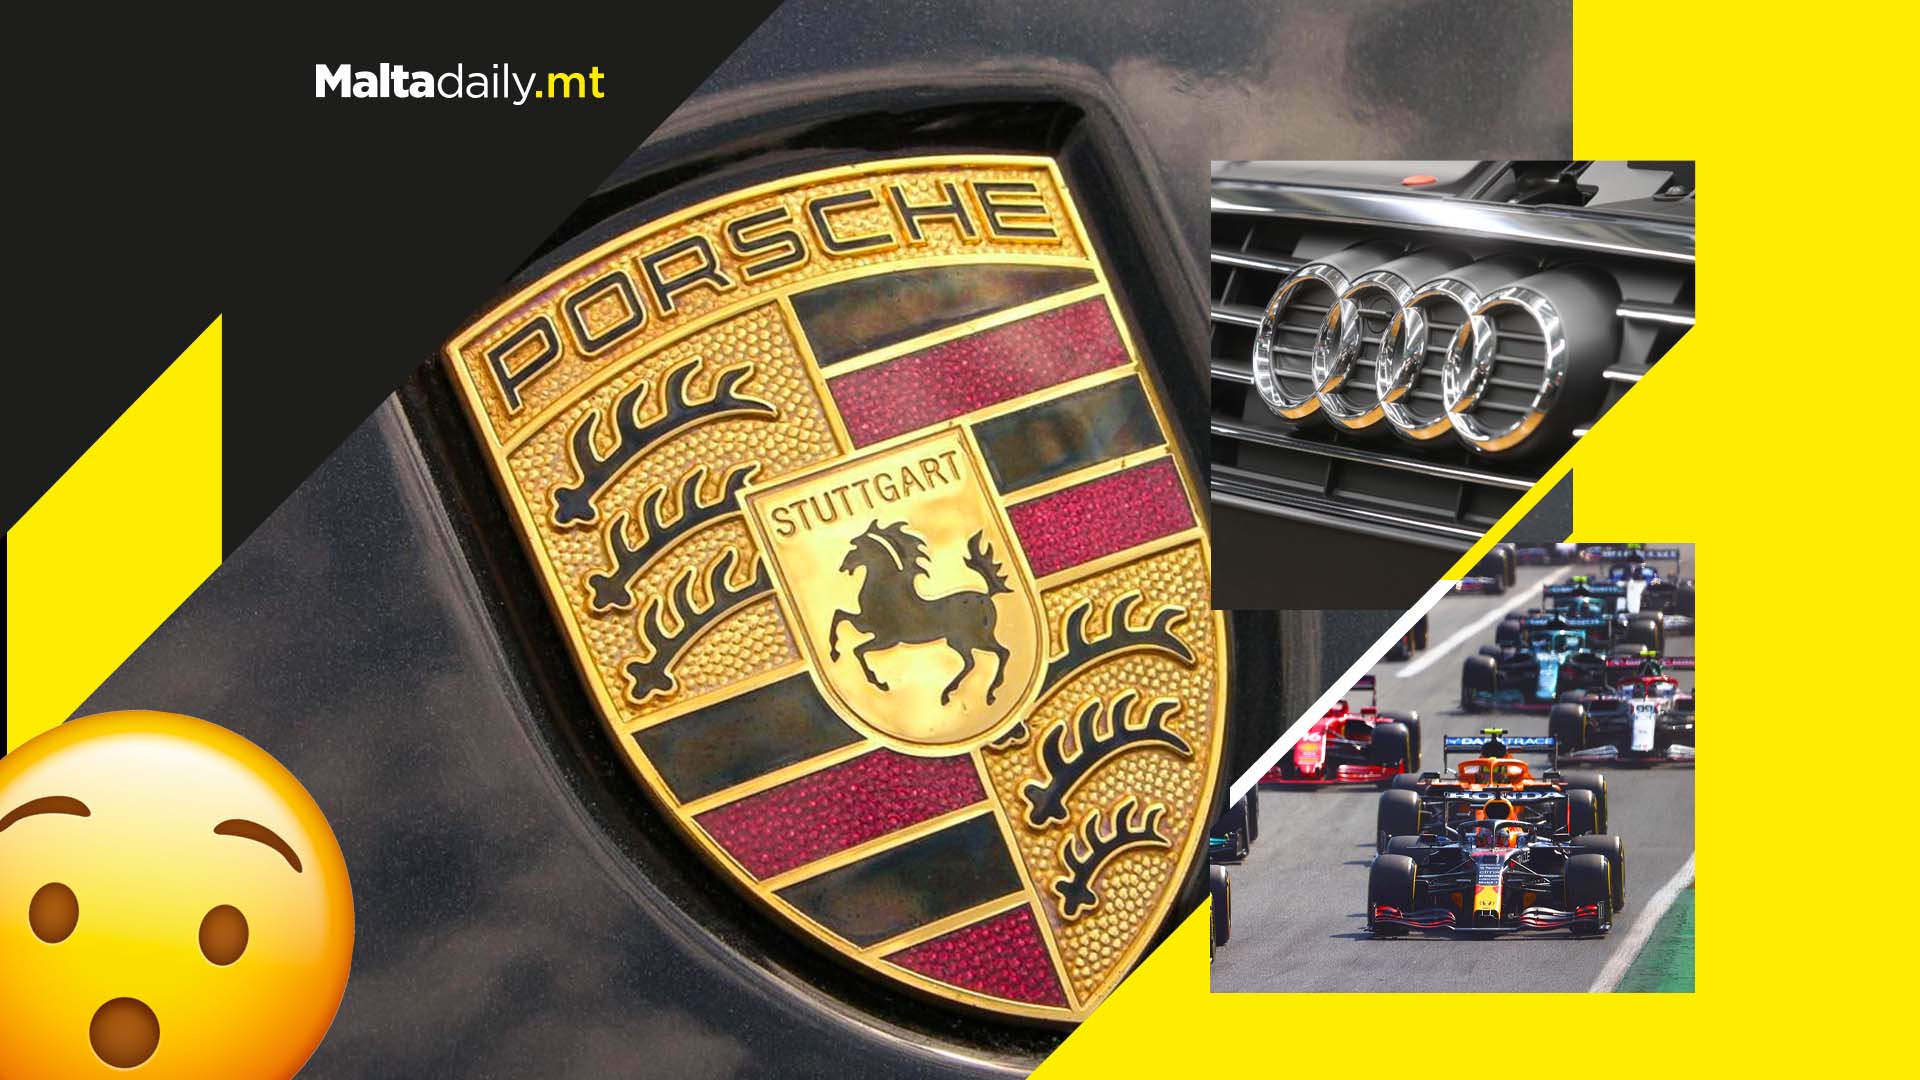 Audi and Porsche will join Formula 1 by 2026 reveals Volkswagen chief